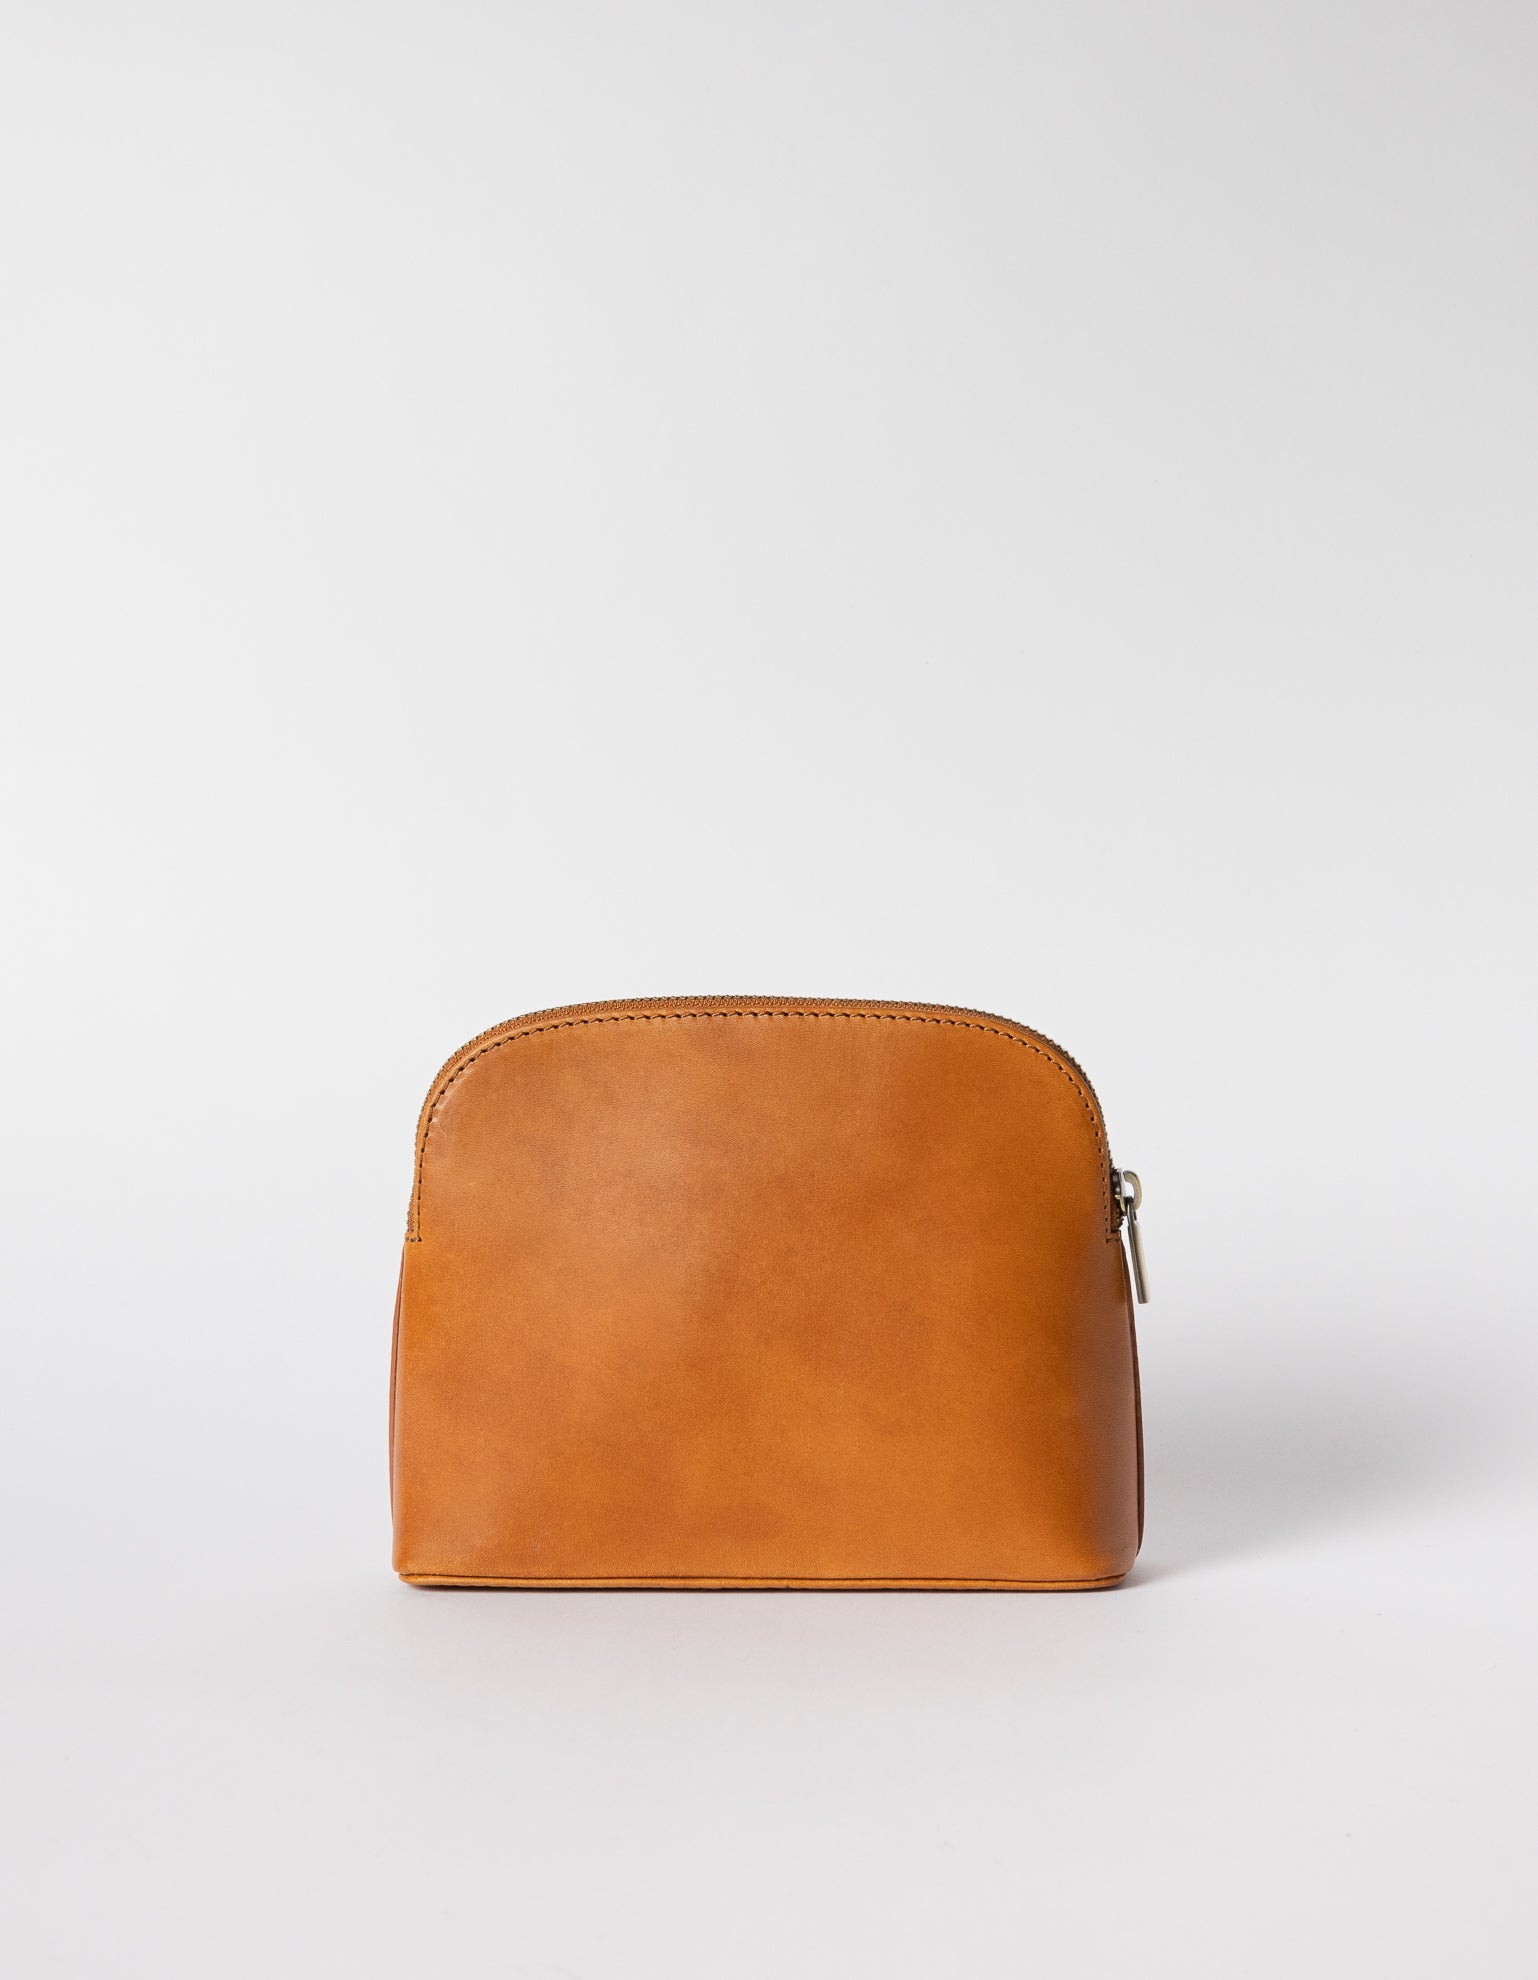 Cosmetic bag. Rectangle shape, cognac classic leather. Back picture